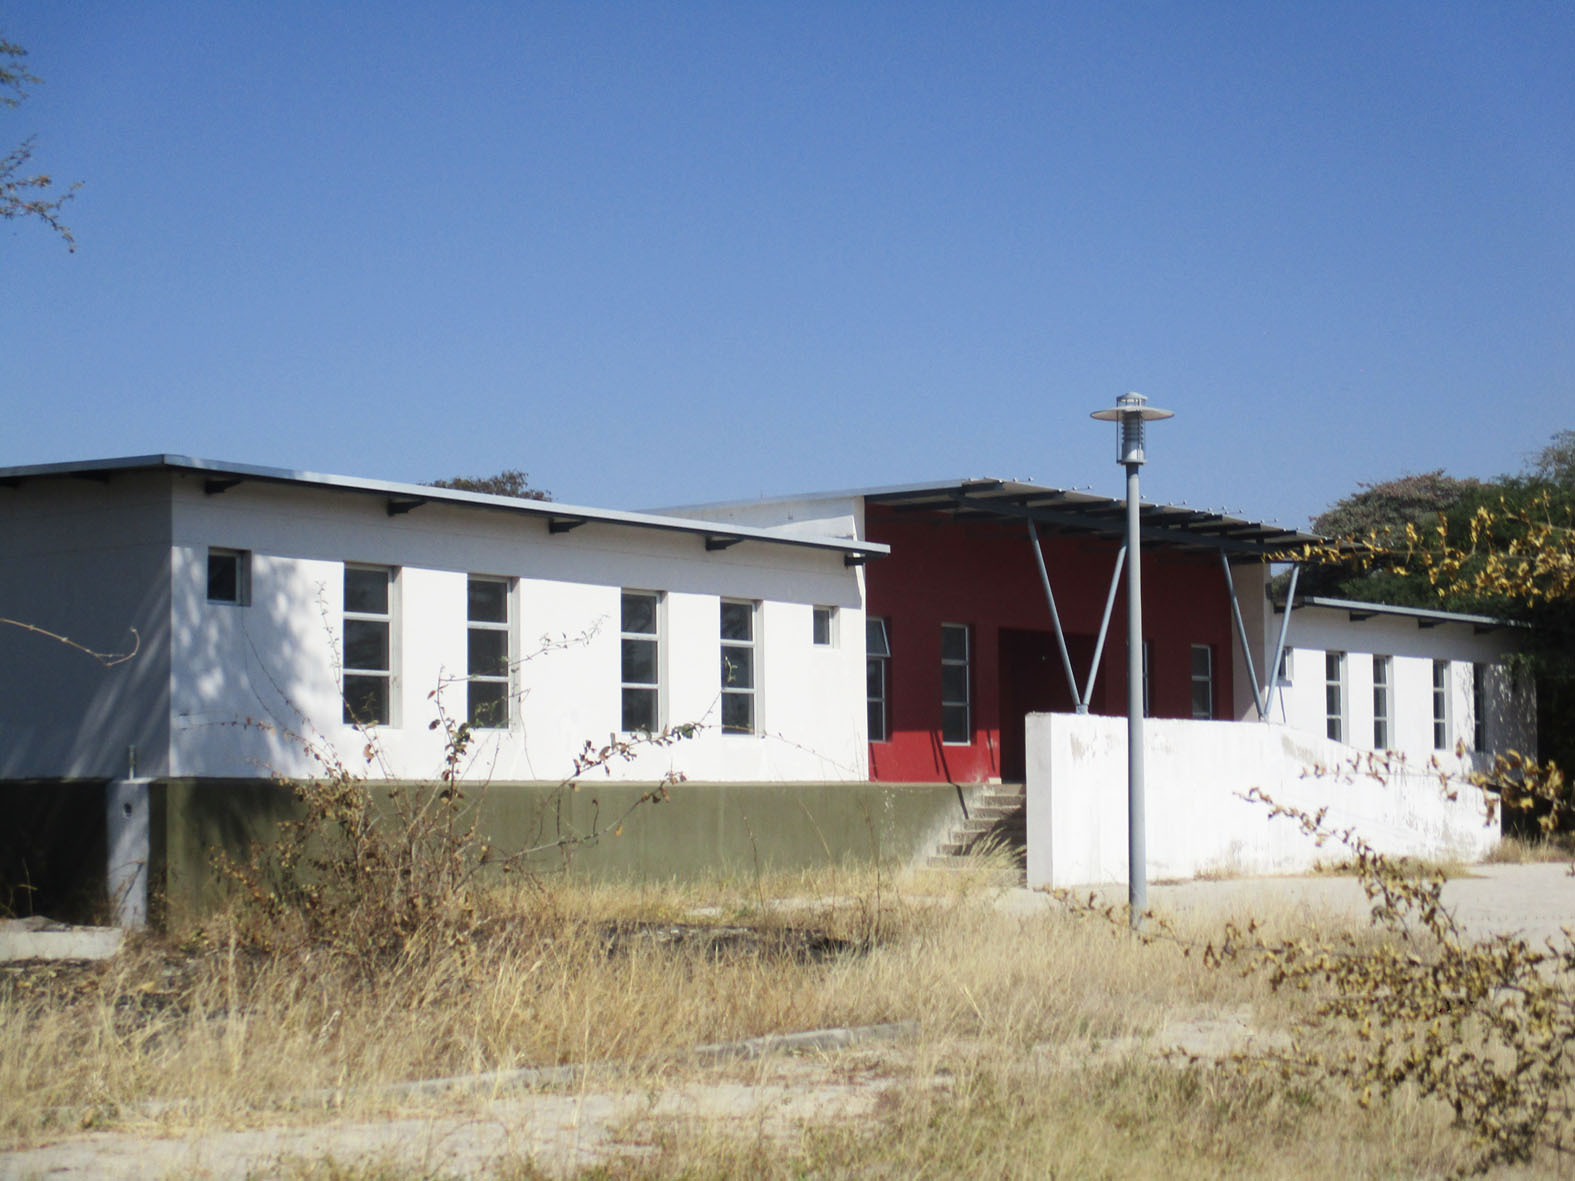 Delayed inauguration for new Katima Magistrates’ Court annoys residents